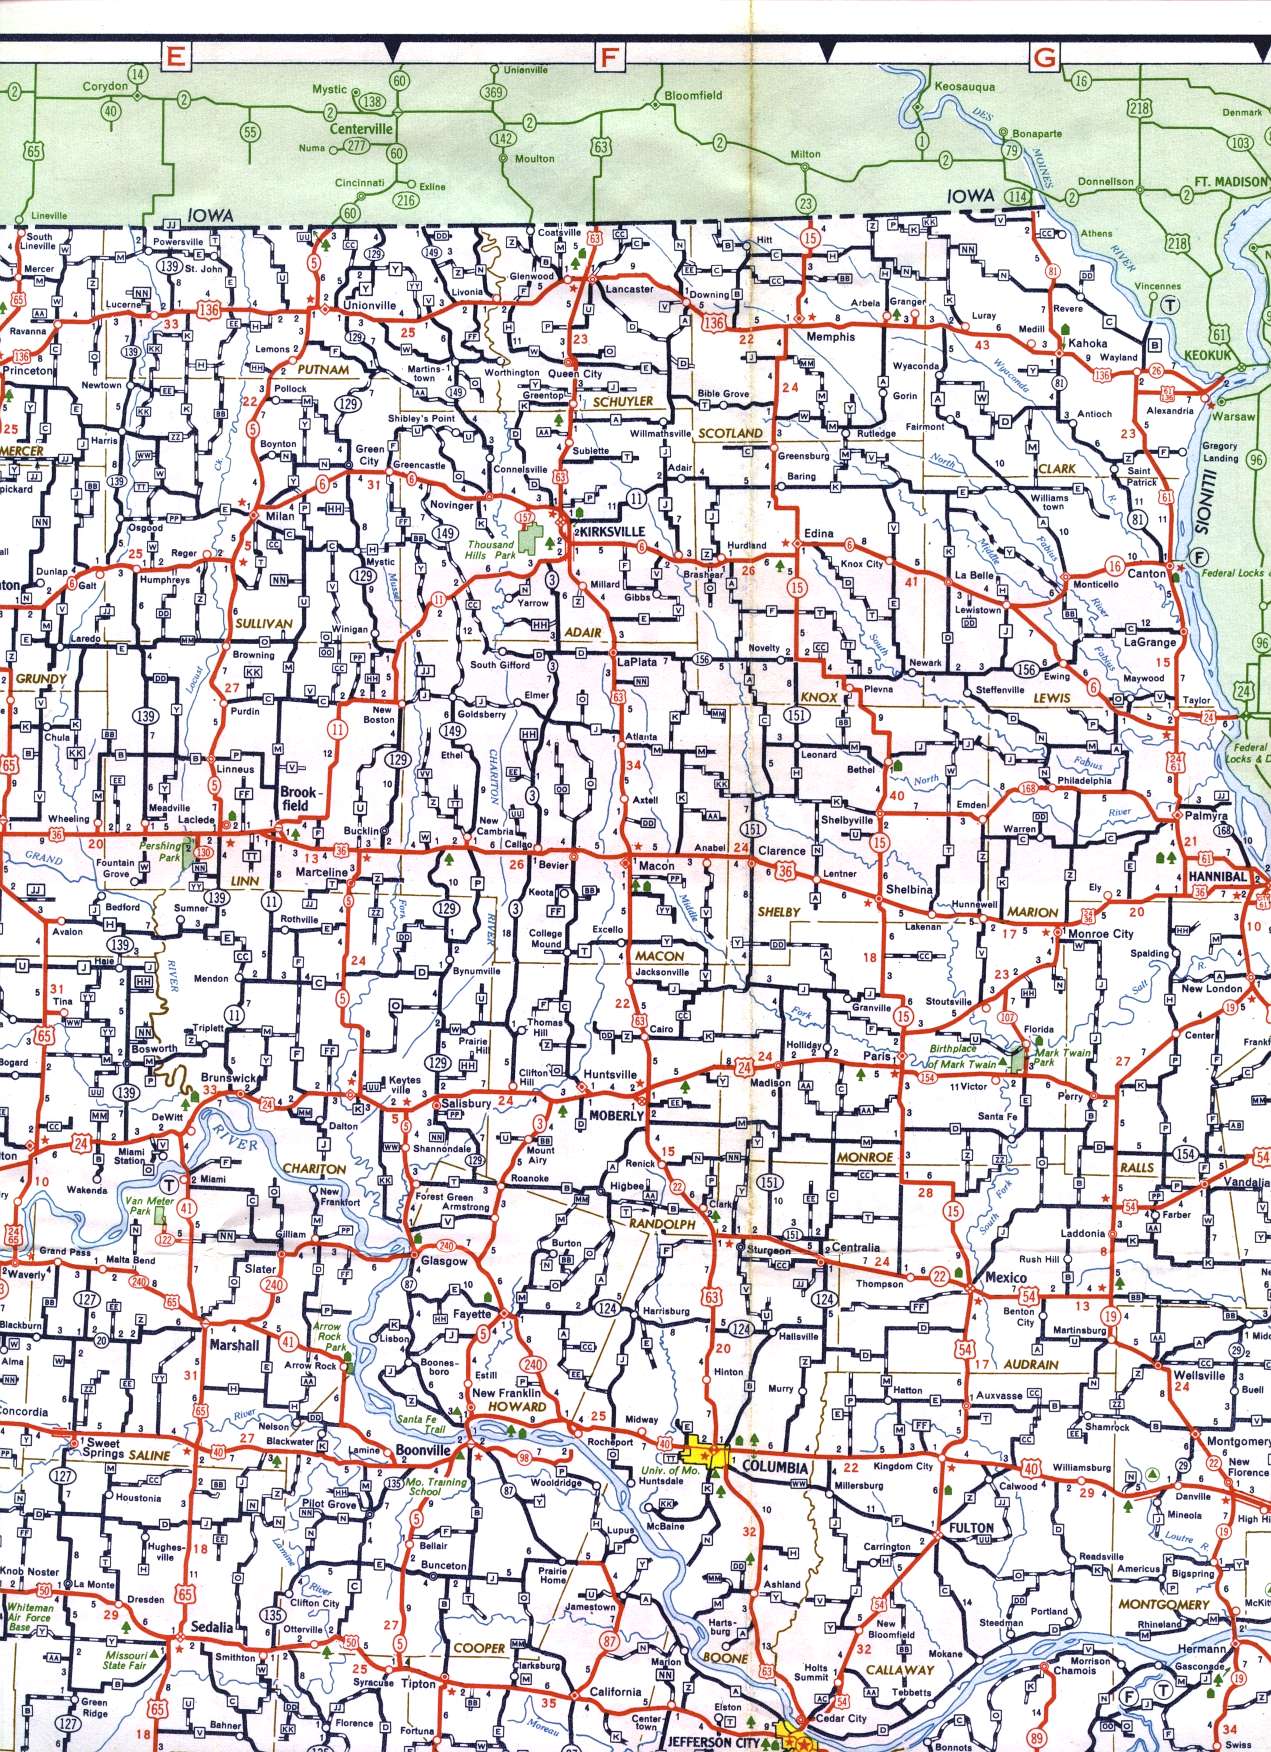 Northeastern section of Missouri from 1958 official highway map